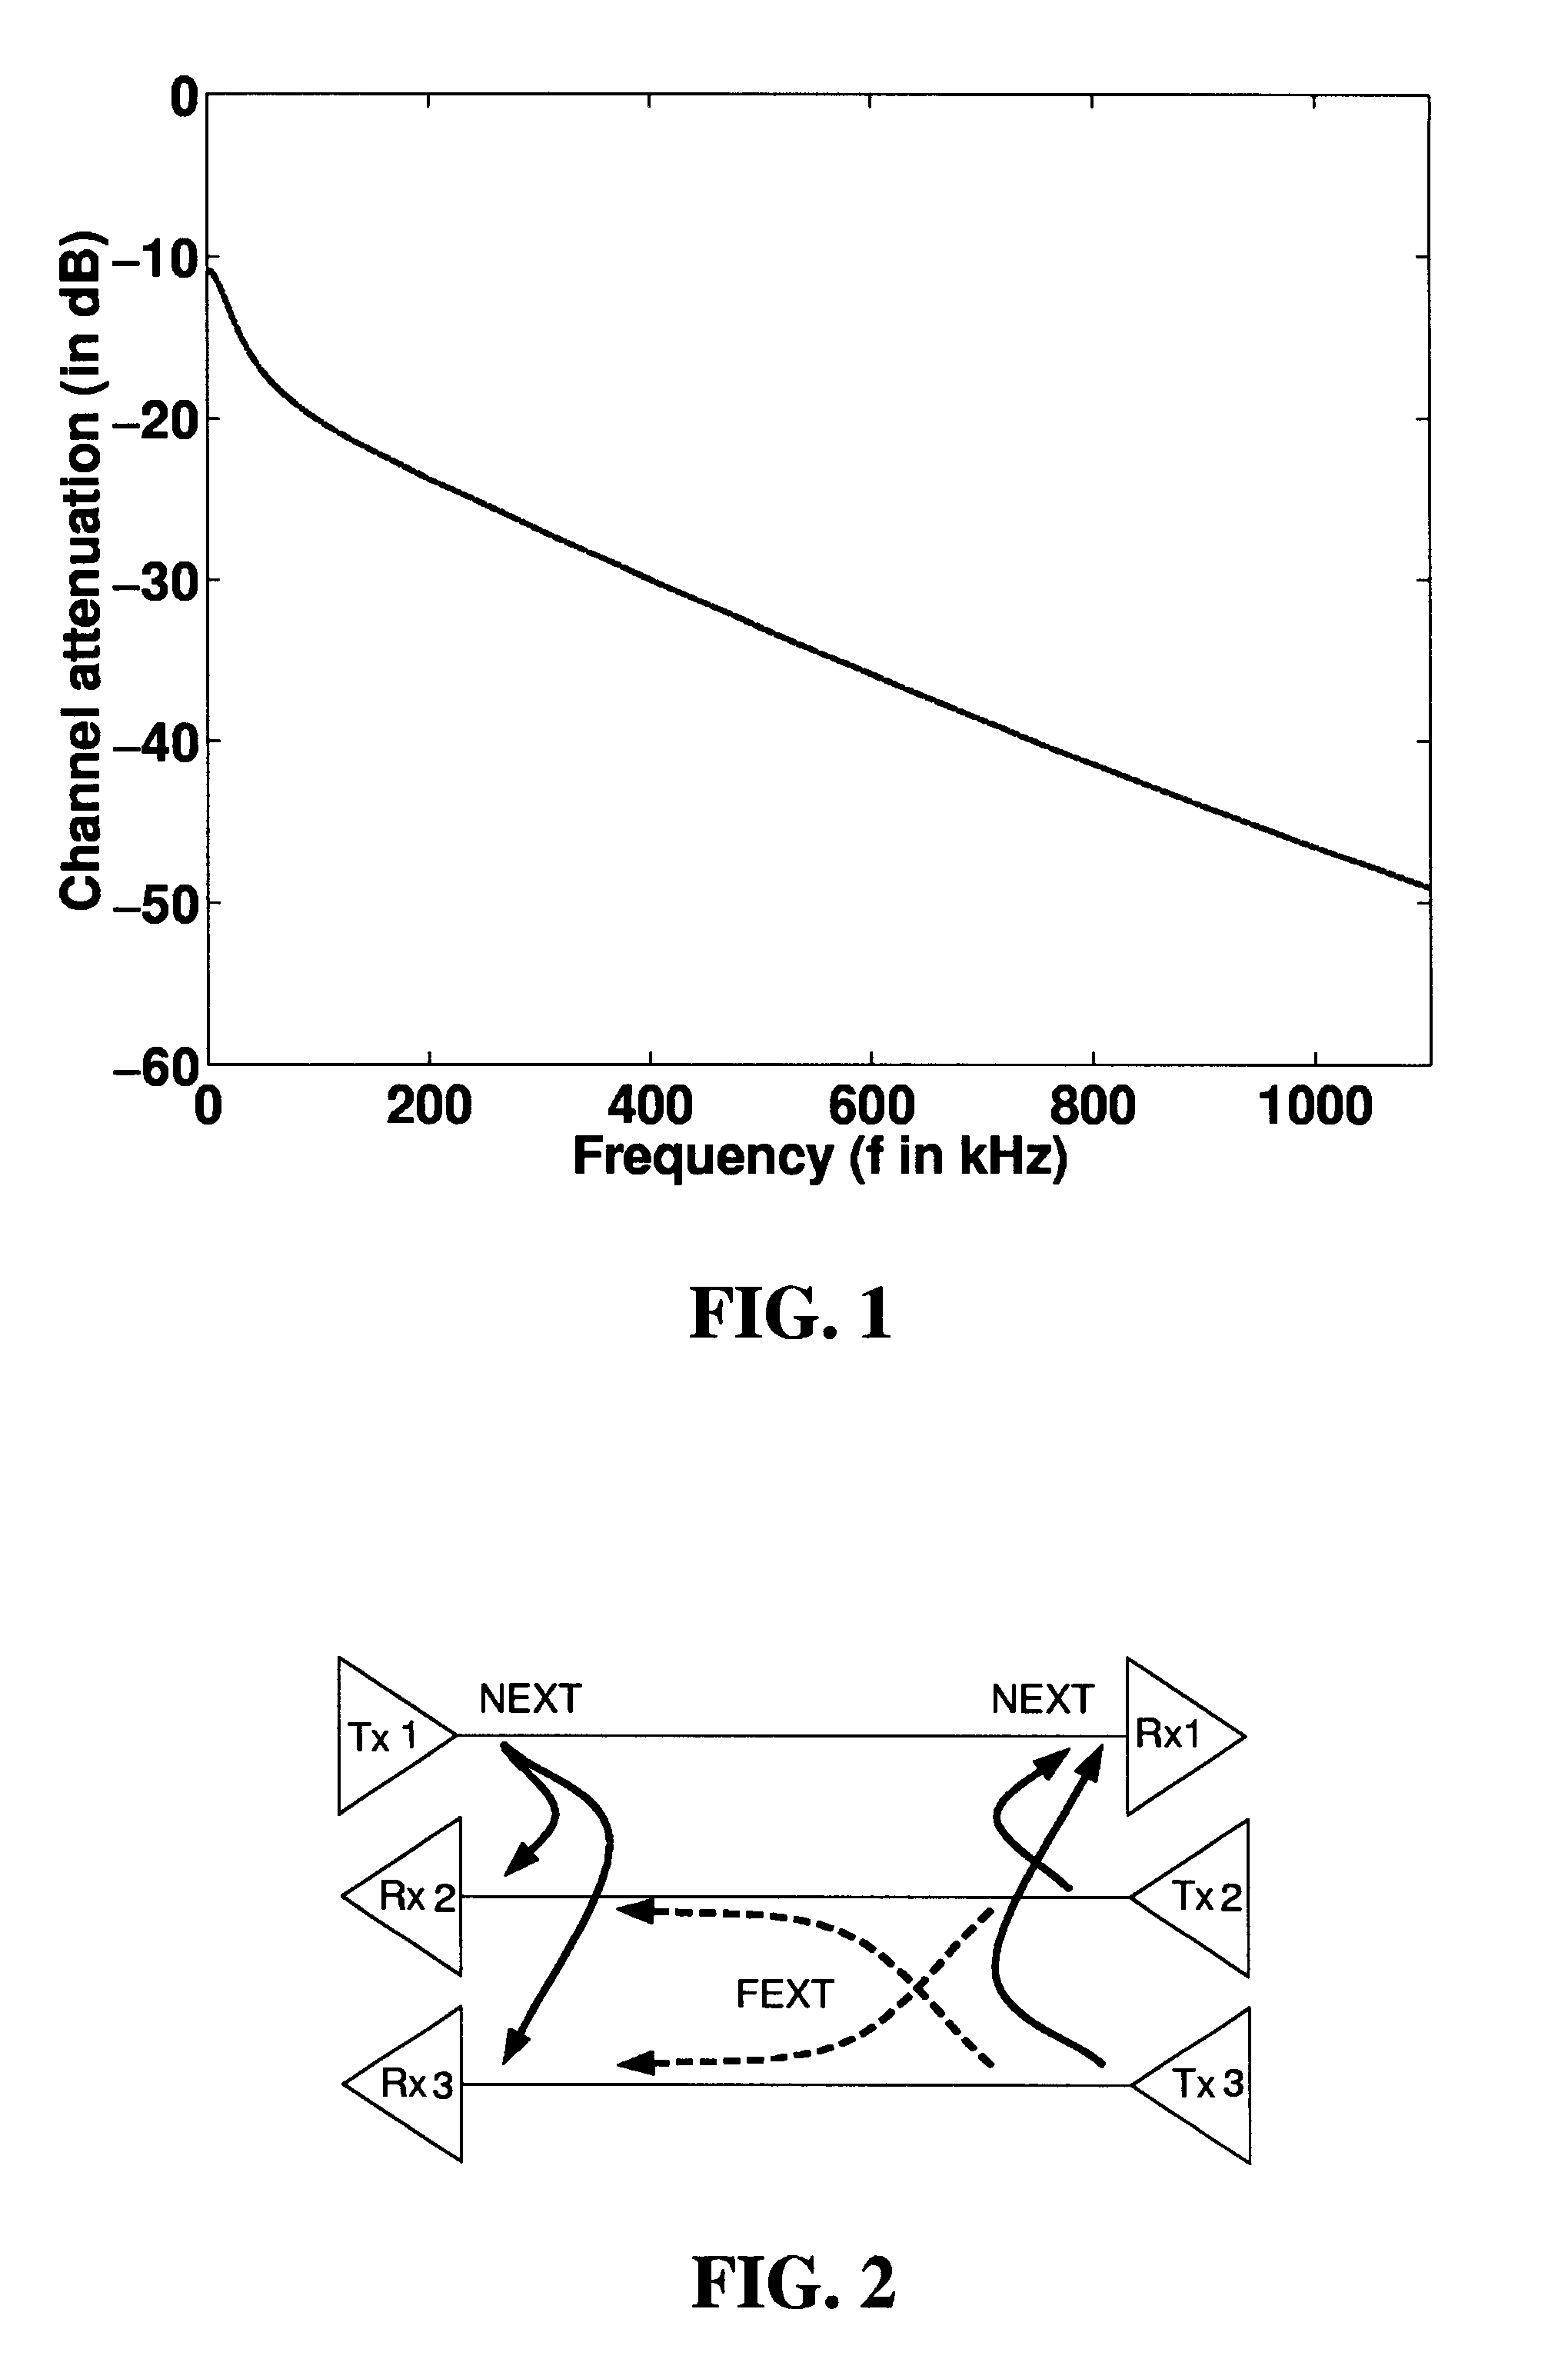 Spectral optimization and joint signaling techniques with upstream/downstream separation for communication in the presence of crosstalk